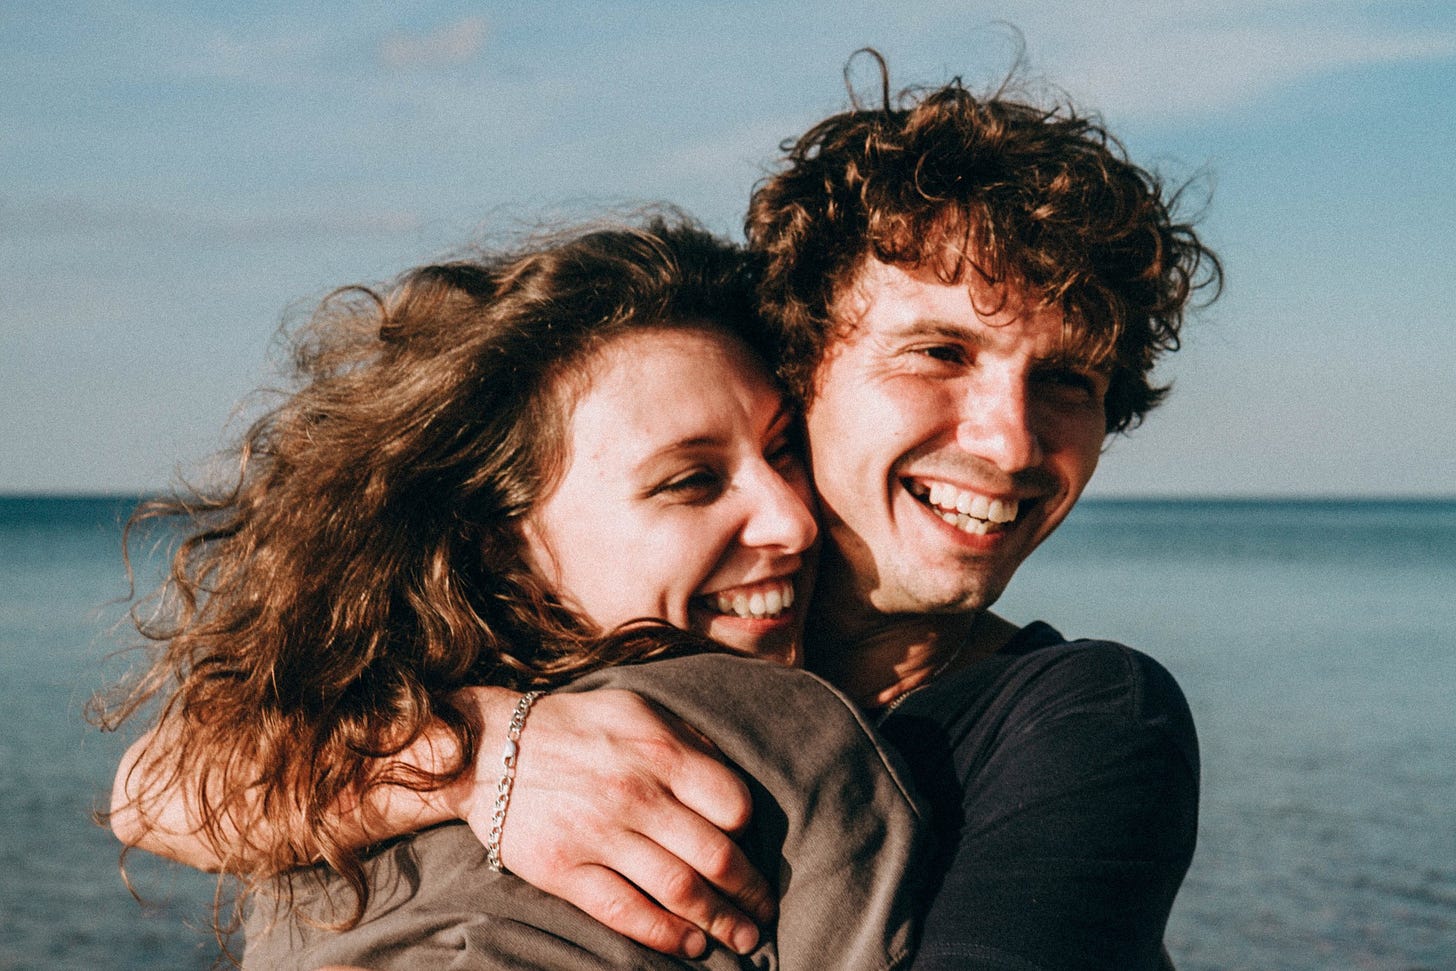 A smiling couple embraces on a beach.